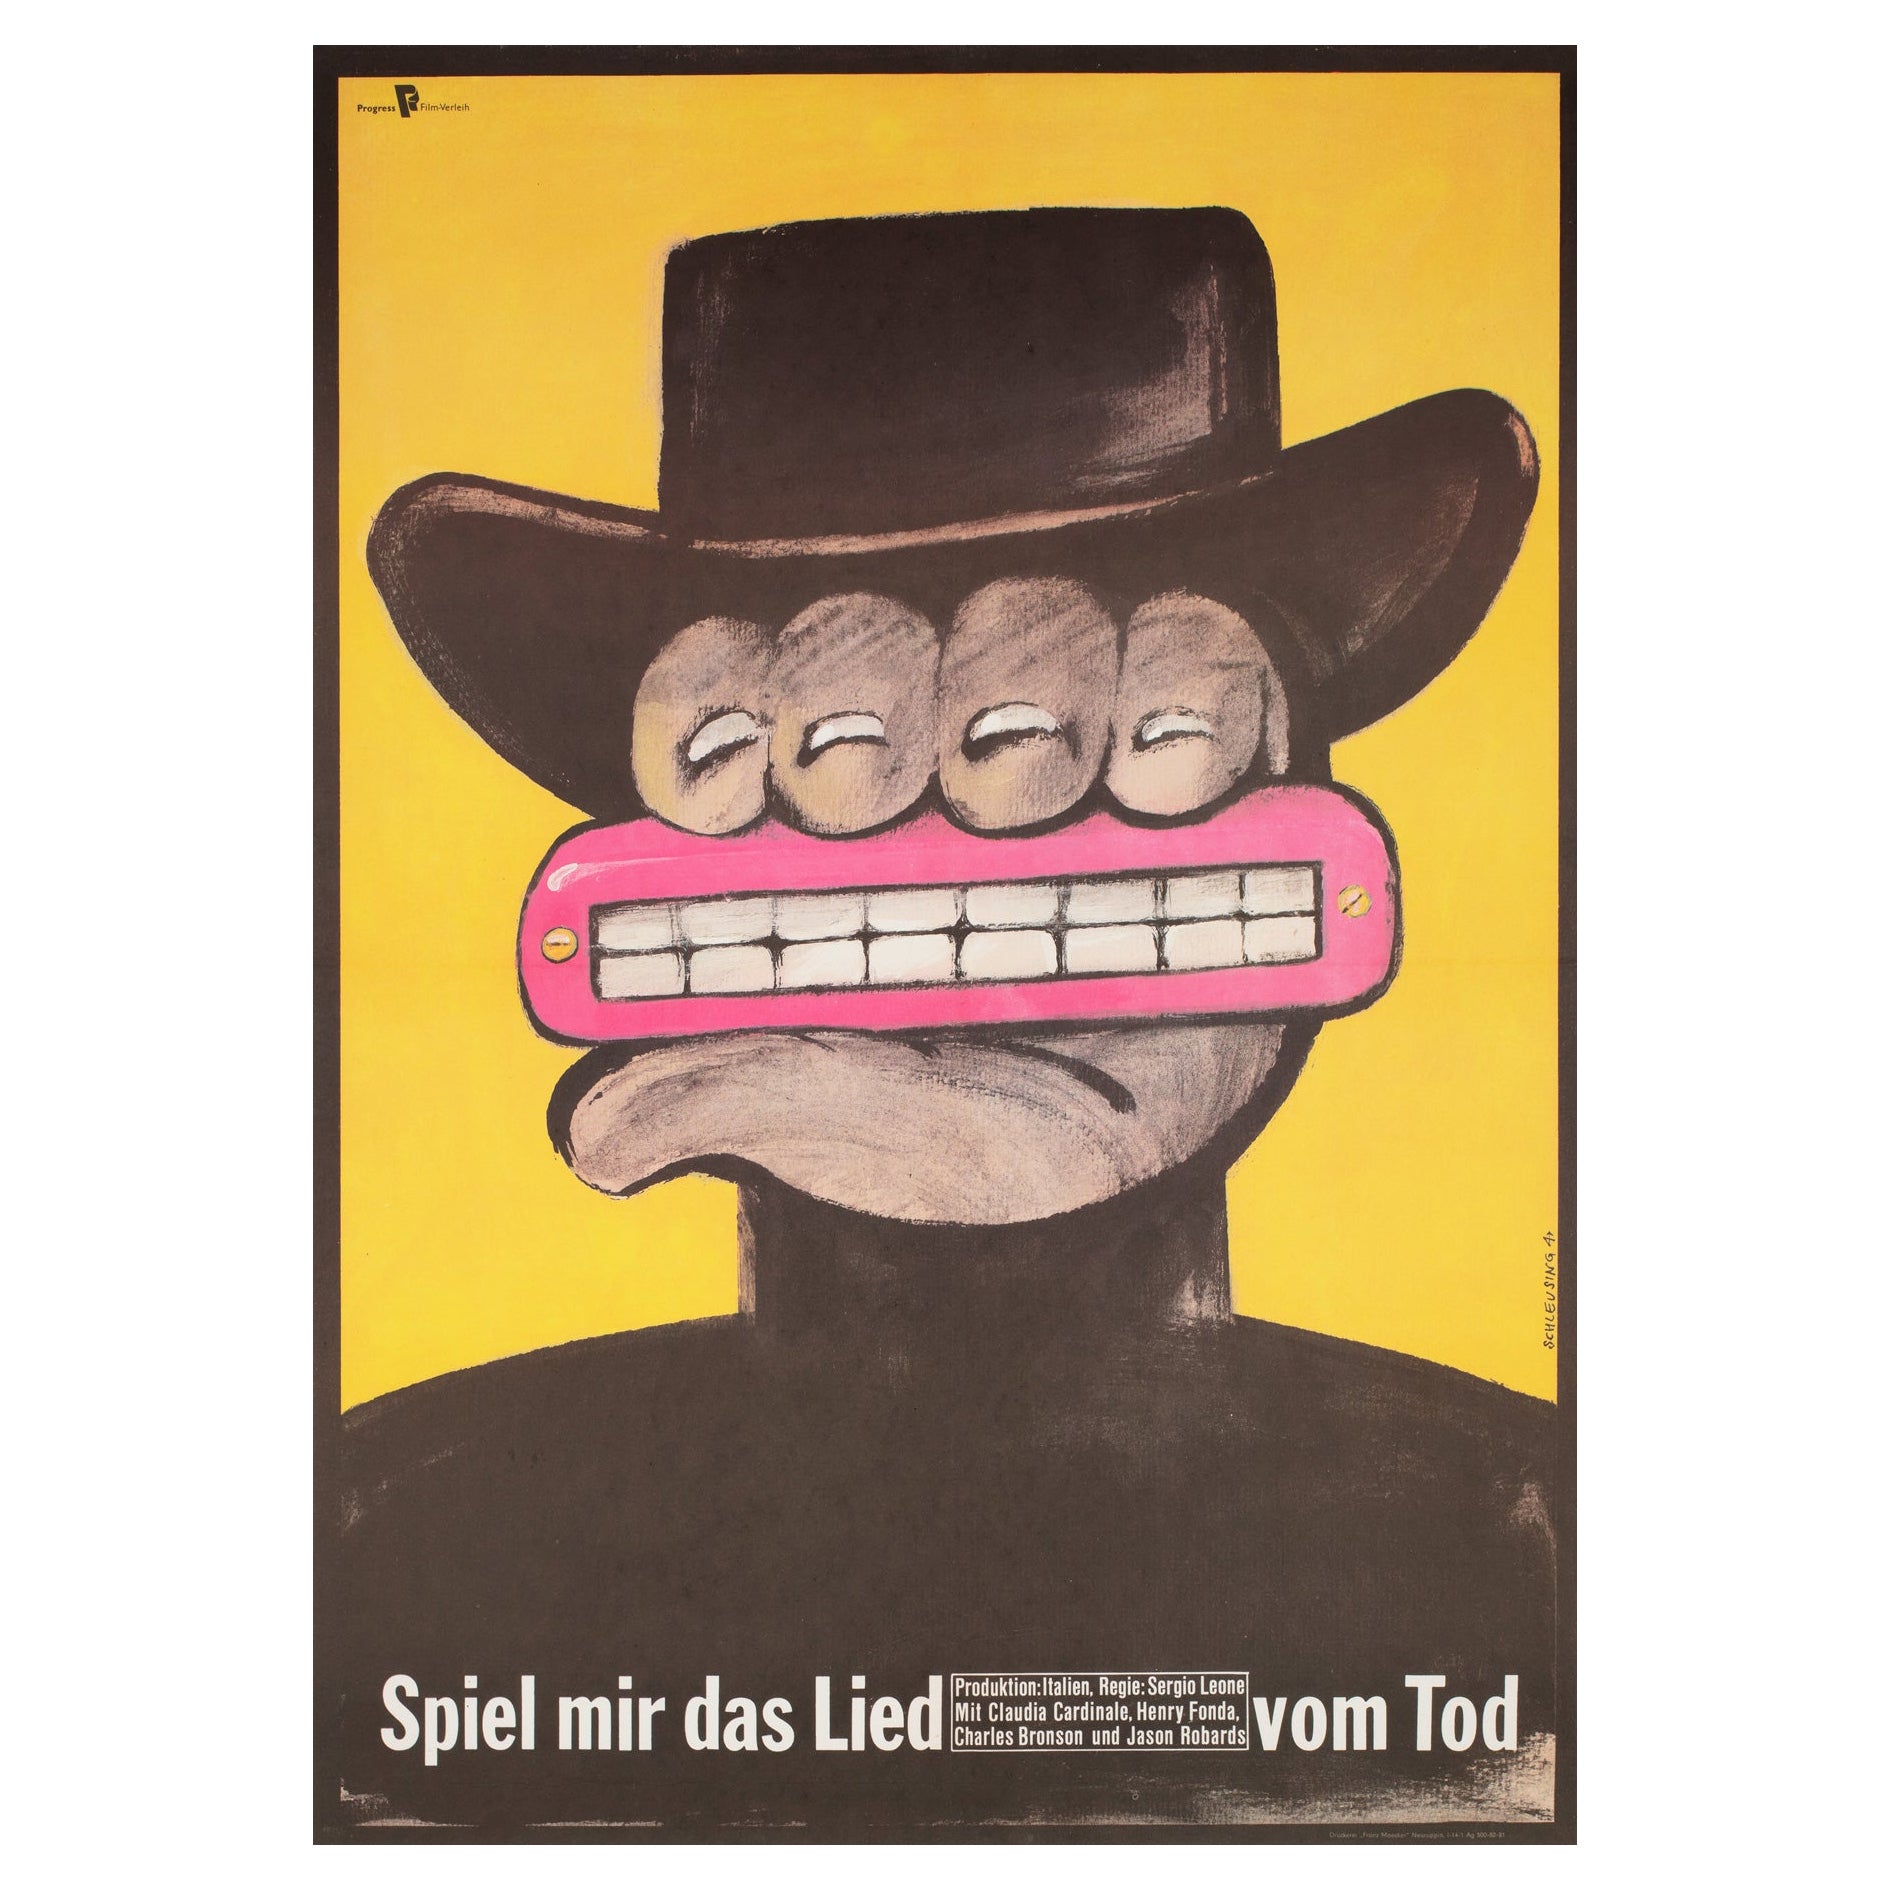 Once Upon a Time in the West 1968 East German Film Poster, Thomas Schleusing For Sale